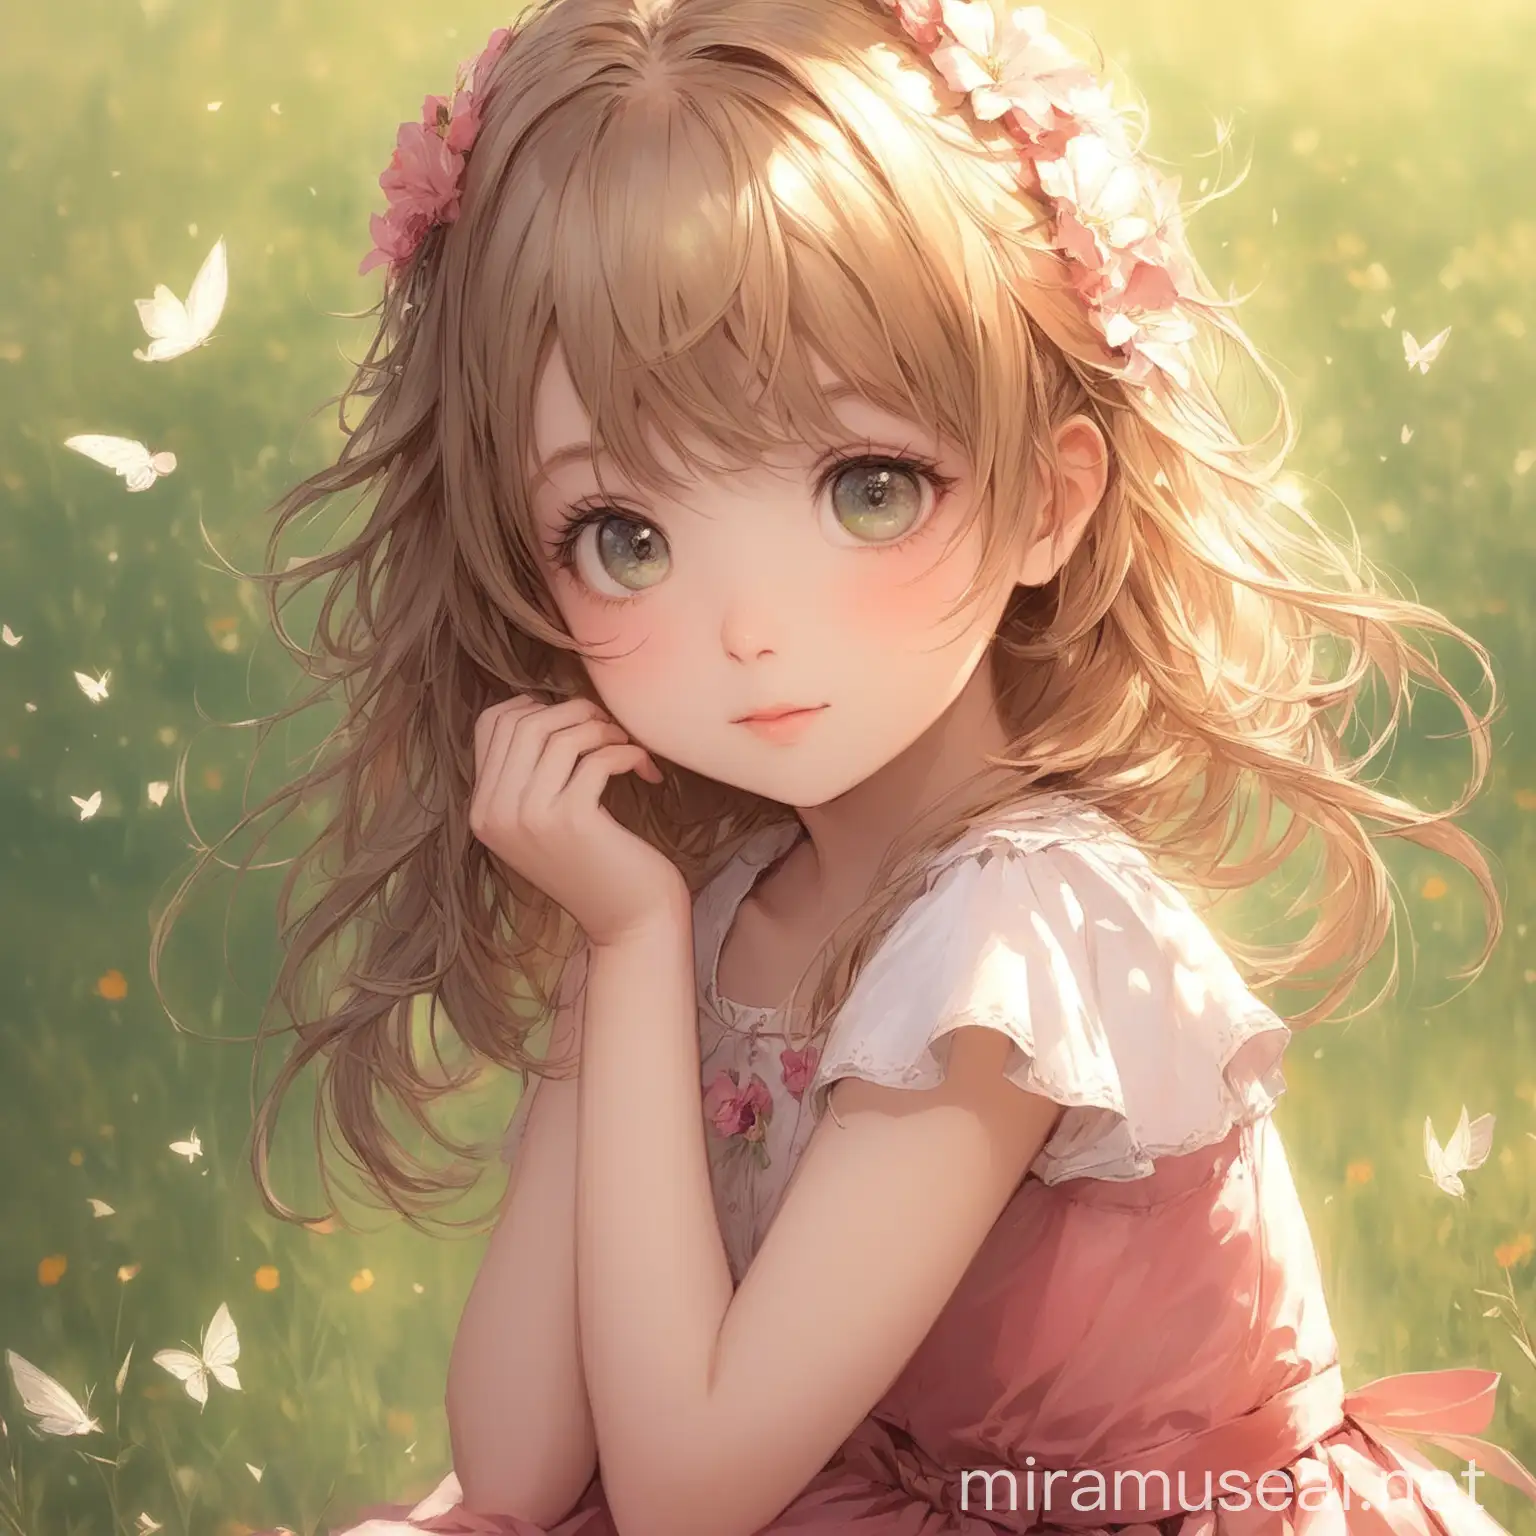 Enchanting Portrait of a Wonderful Girl with Floral Crown